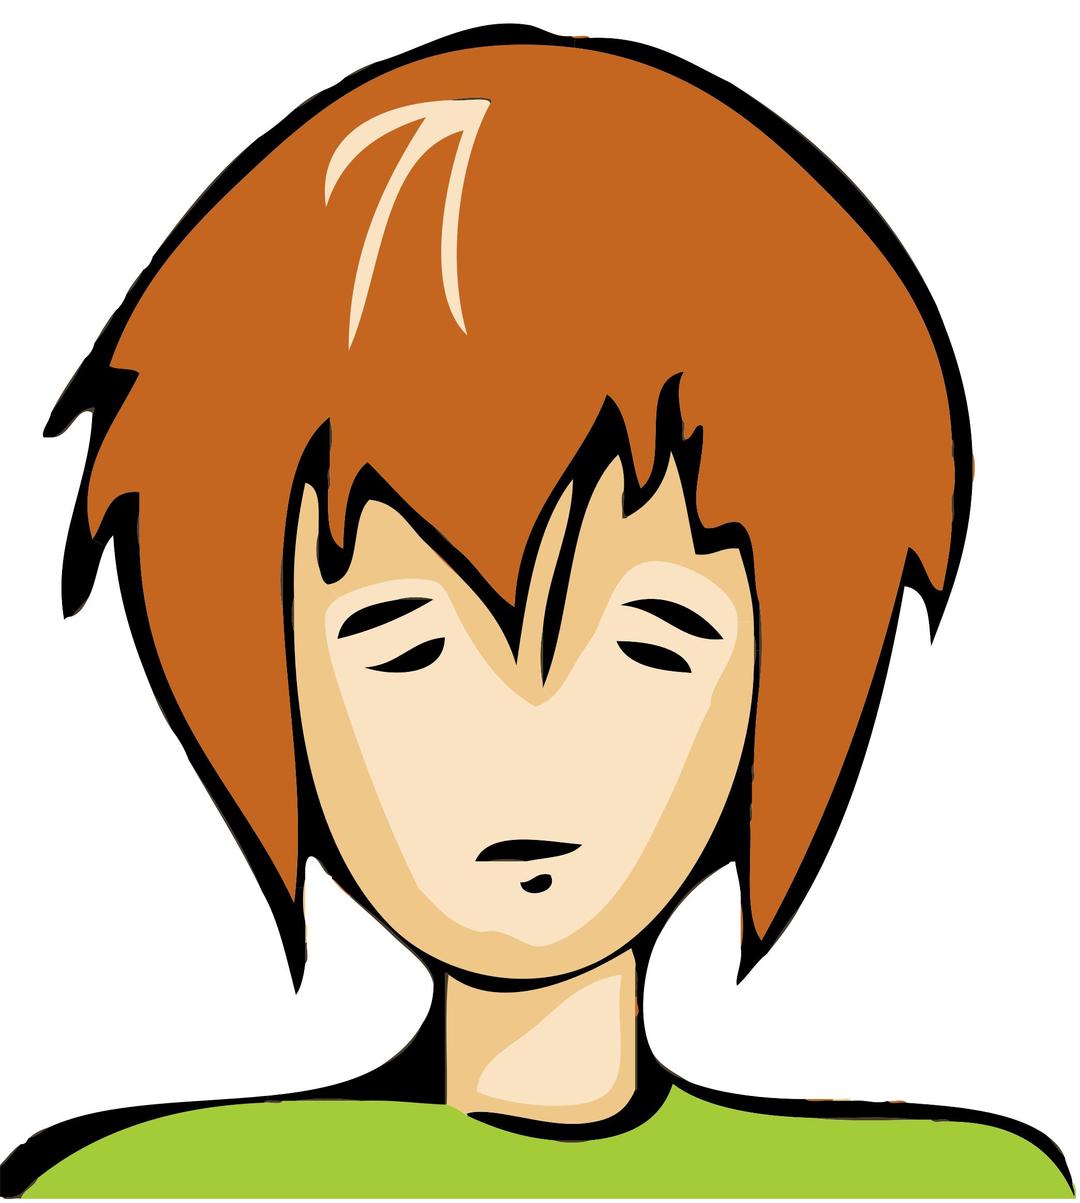 Bad Day Avatar png transparent